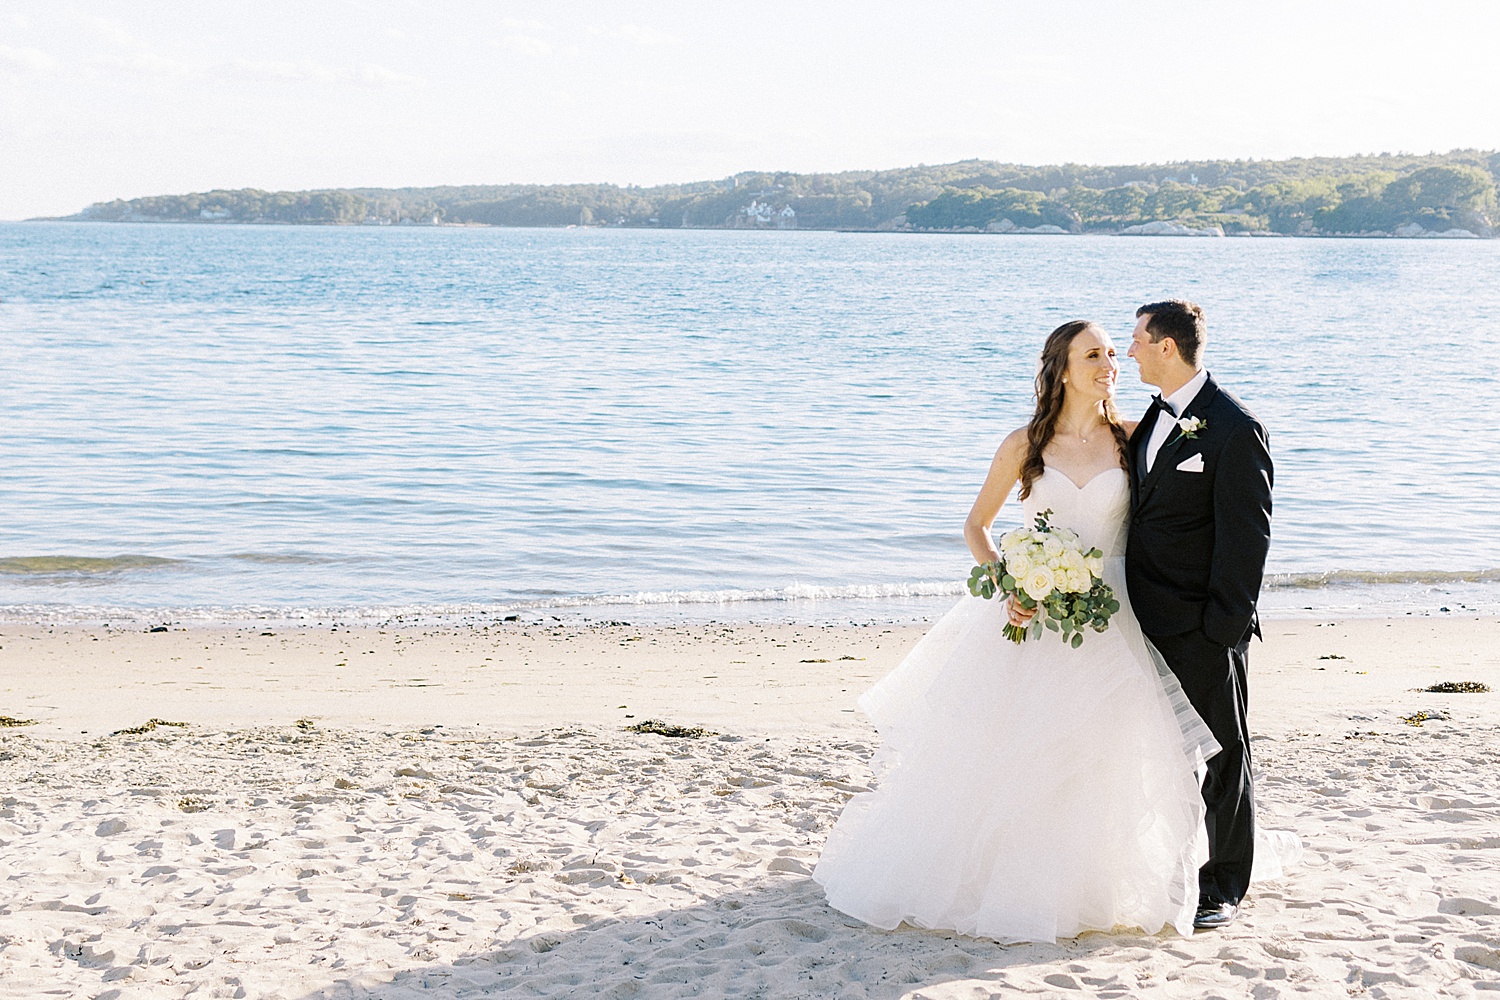 Newlyweds embracing on the beach by Lynne Reznick photography